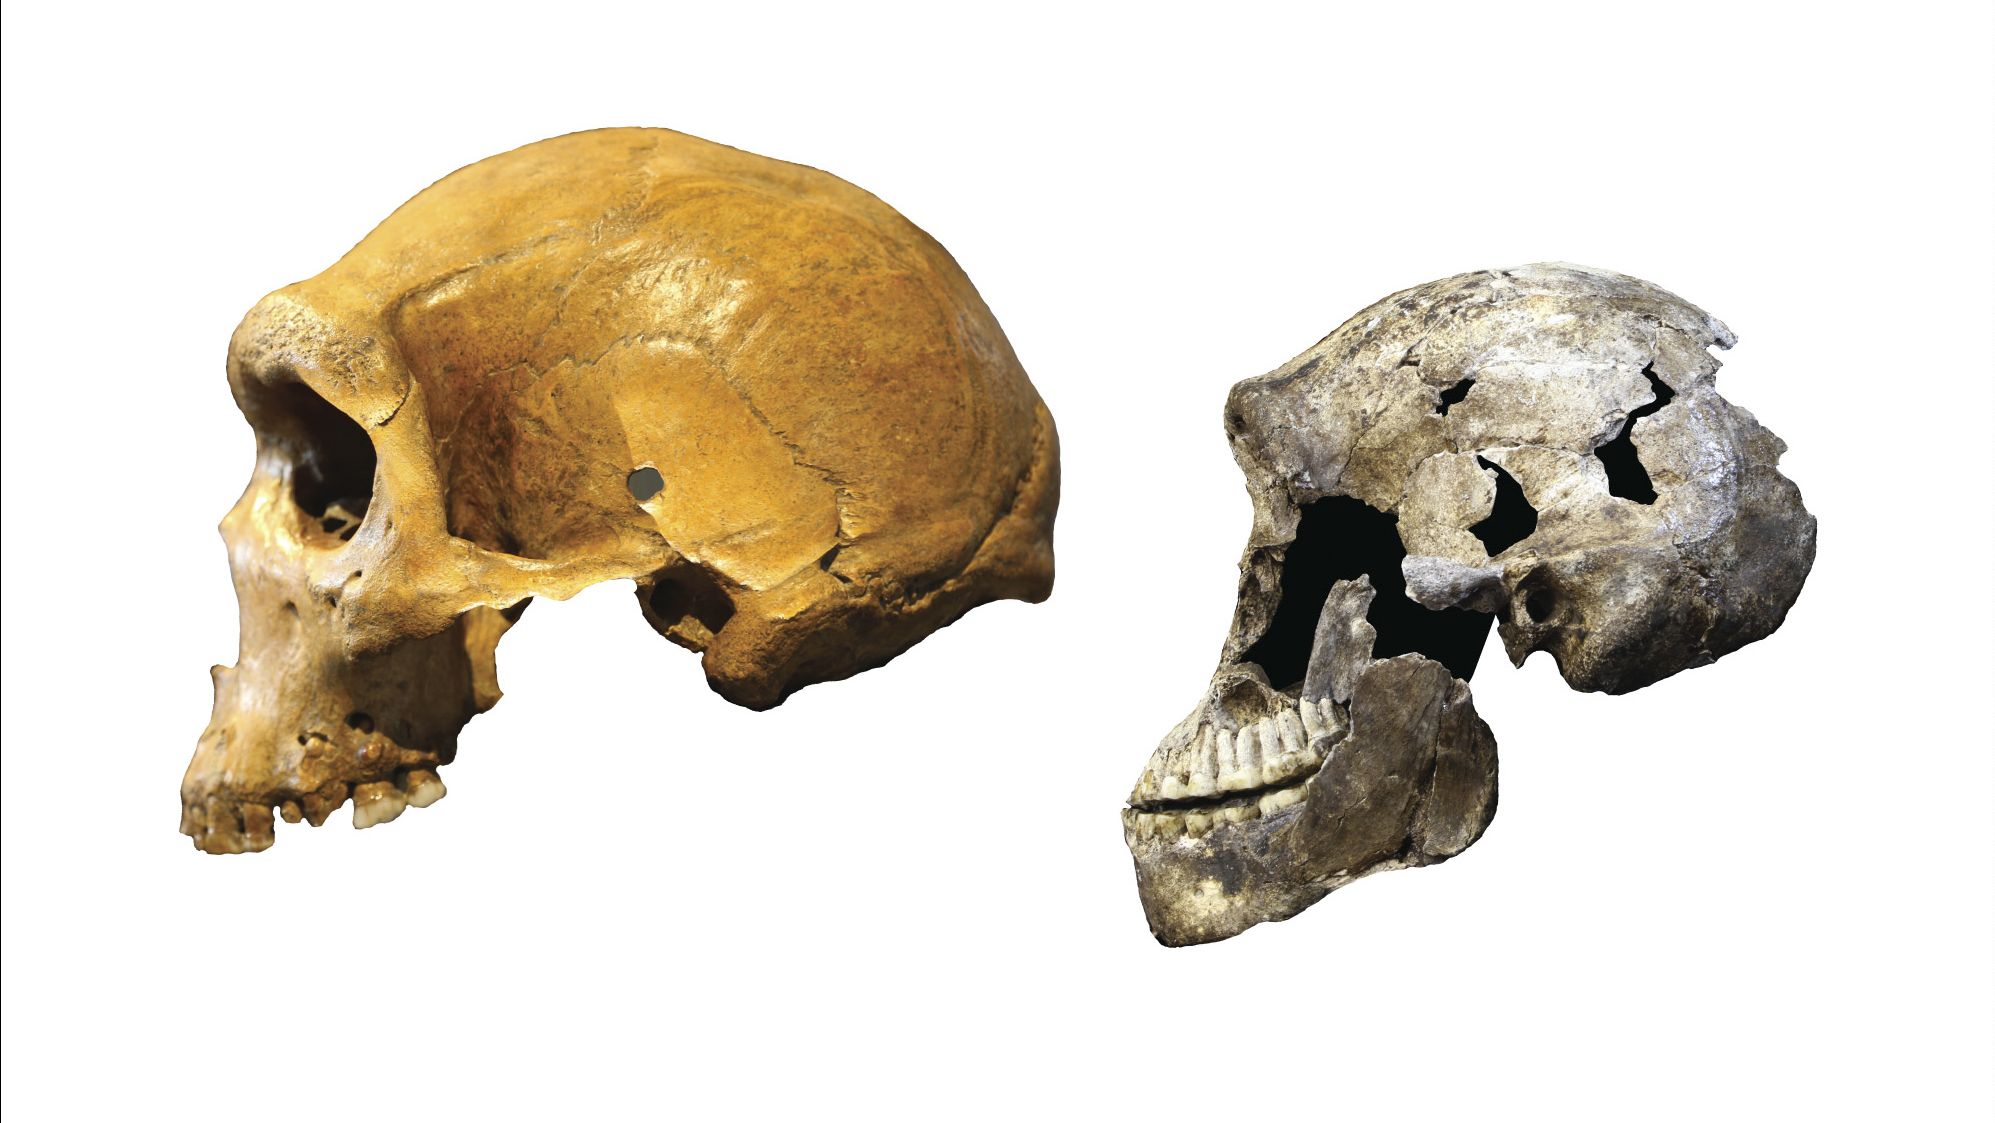 Homo naledi was very different from archaic humans that lived around the same time. Left: Kabwe skull from Zambia, an archaic human. Right: ''Neo'' skull of Homo naledi. 